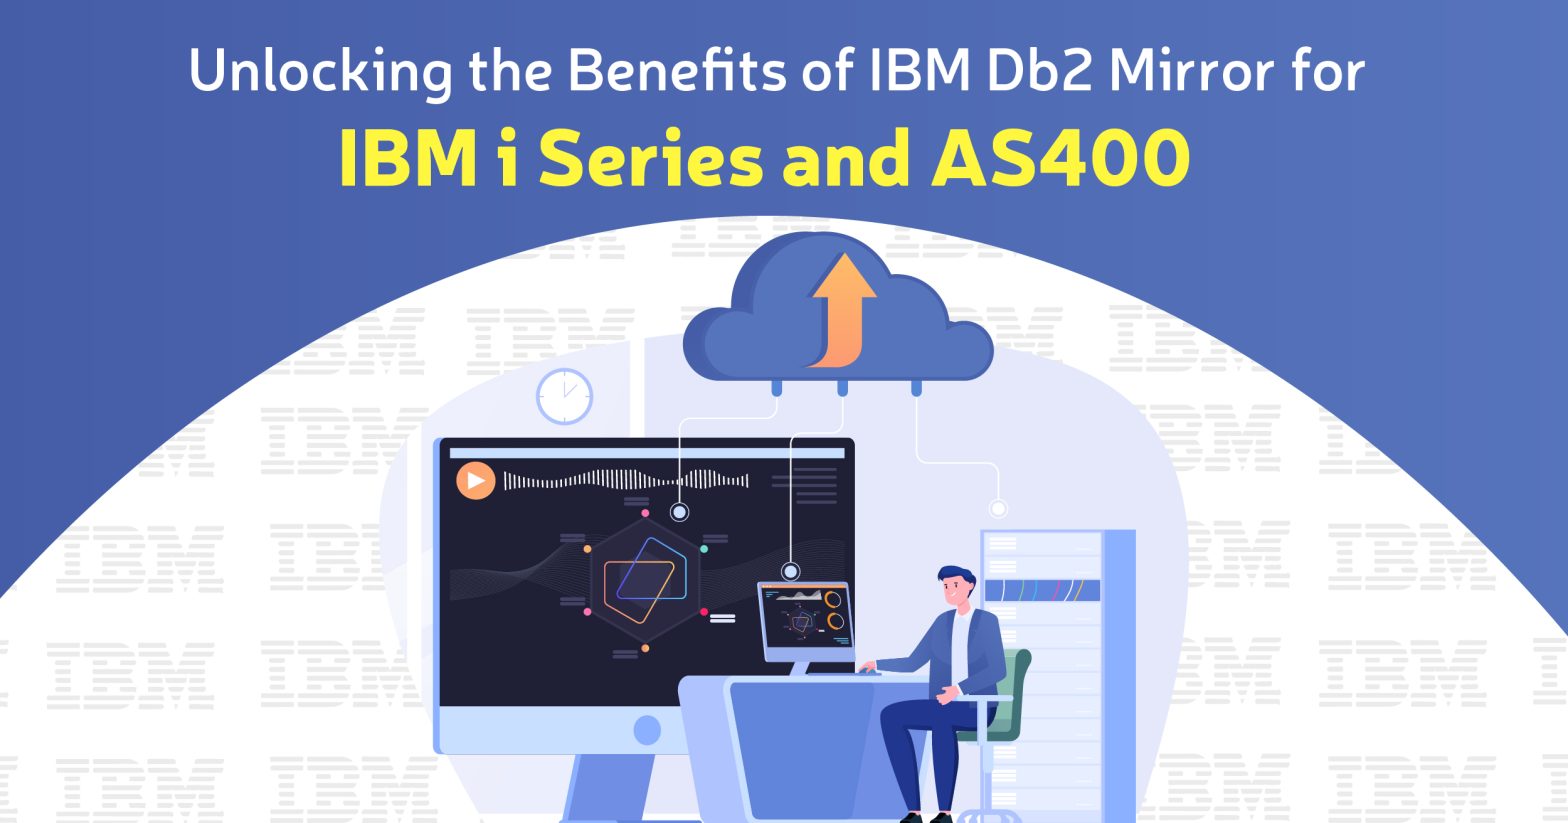 Unlocking the Benefits of IBM Db2 Mirror for IBM i Series and AS400